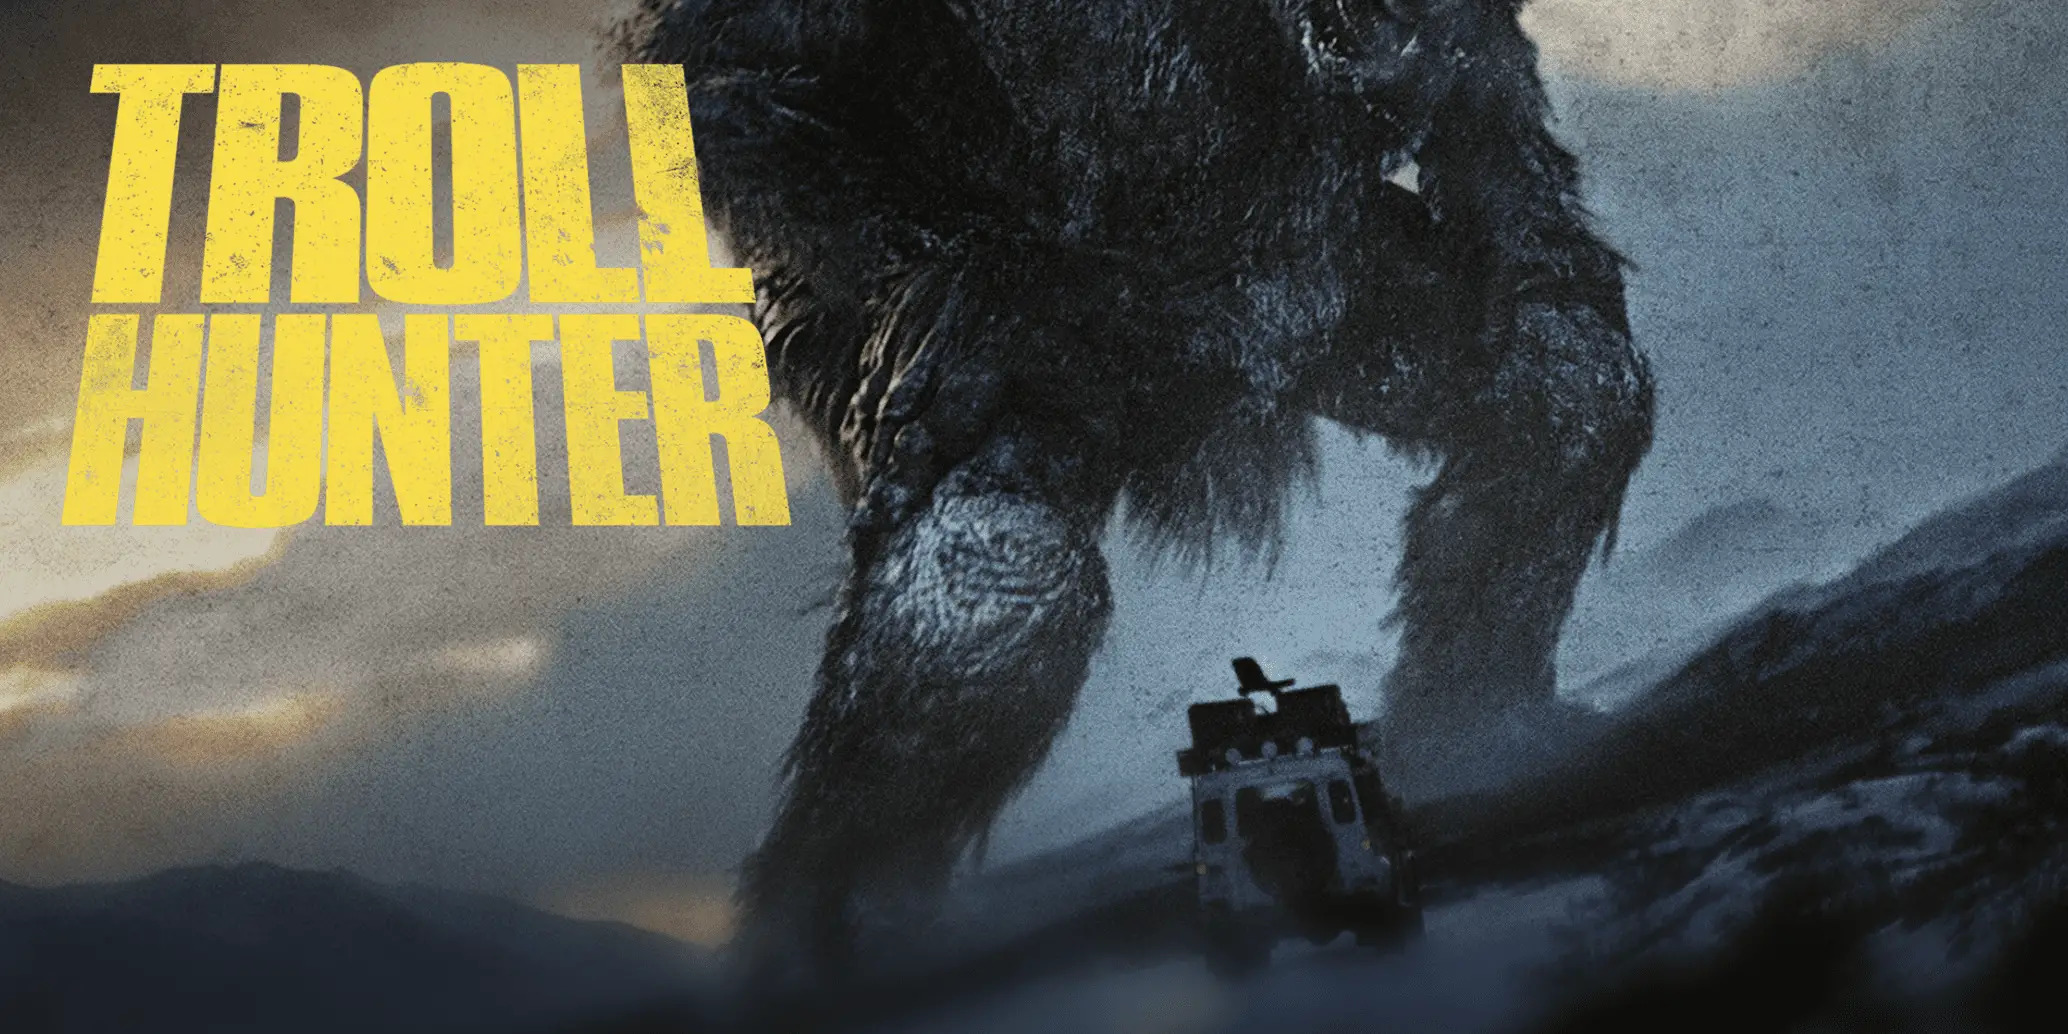 37-facts-about-the-movie-trollhunter